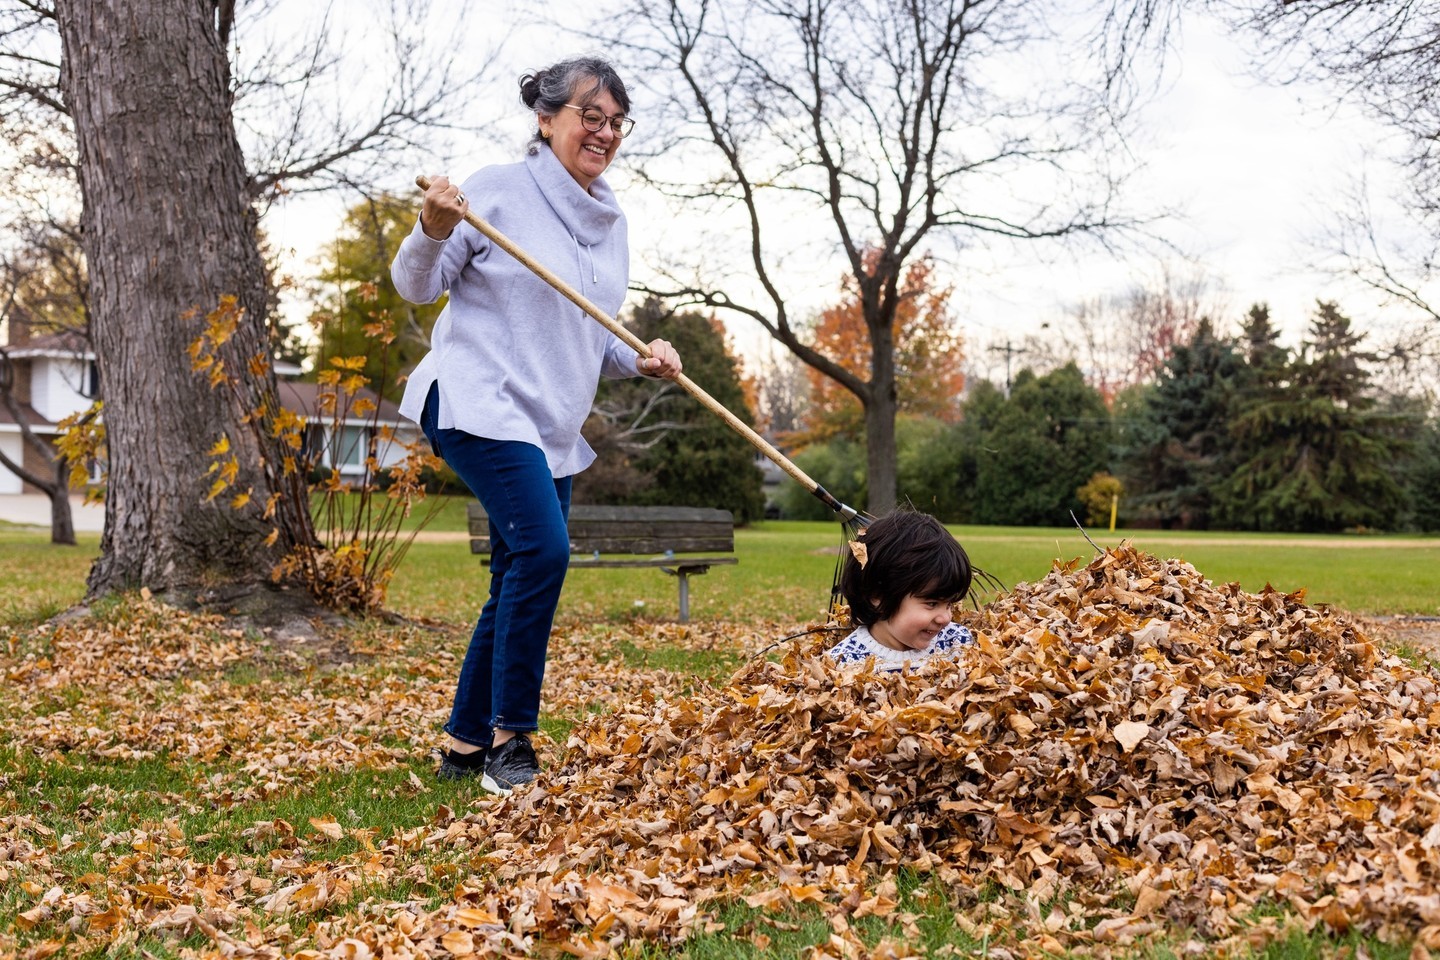 Caring for your outdoor space in the fall, especially when it comes to leaves, is essential to maintain a healthy and beautiful landscape. Here are a few #CareForPlace Tips:⁠⁠ Raking and Mulching Leaves ⁠⁠Regularly rake fallen leaves to prevent them from smothering your lawn and garden. Consider using a mulching mower to shred leaves into small pieces. This adds organic matter to the soil and helps improve its quality.⁠⁠ Fall Lawn Care ⁠⁠Continue mowing your lawn at the appropriate height until it stops growing. Aerate the lawn to improve soil aeration and water penetration.⁠⁠ Garden Clean-Up ⁠⁠Remove dead or diseased plants and spent annuals from your garden beds. Add a layer of compost to the garden beds to enrich the soil.⁠⁠Inspect Trees and Shrubs ⁠⁠Prune any dead or damaged branches on trees and shrubs.⁠⁠ Clean Gutters ⁠⁠Clear leaves and debris from your gutters to ensure proper water drainage during fall rains.⁠⁠Caring for your outdoor space in the fall and managing leaves not only keeps your landscape looking tidy, but also helps to prepare it for the winter and ensures a healthy start to the following growing season.⁠⁠We want to hear your story! Send us a DM or click the link in bio to share how you care for place. ⁠ — from Instagram